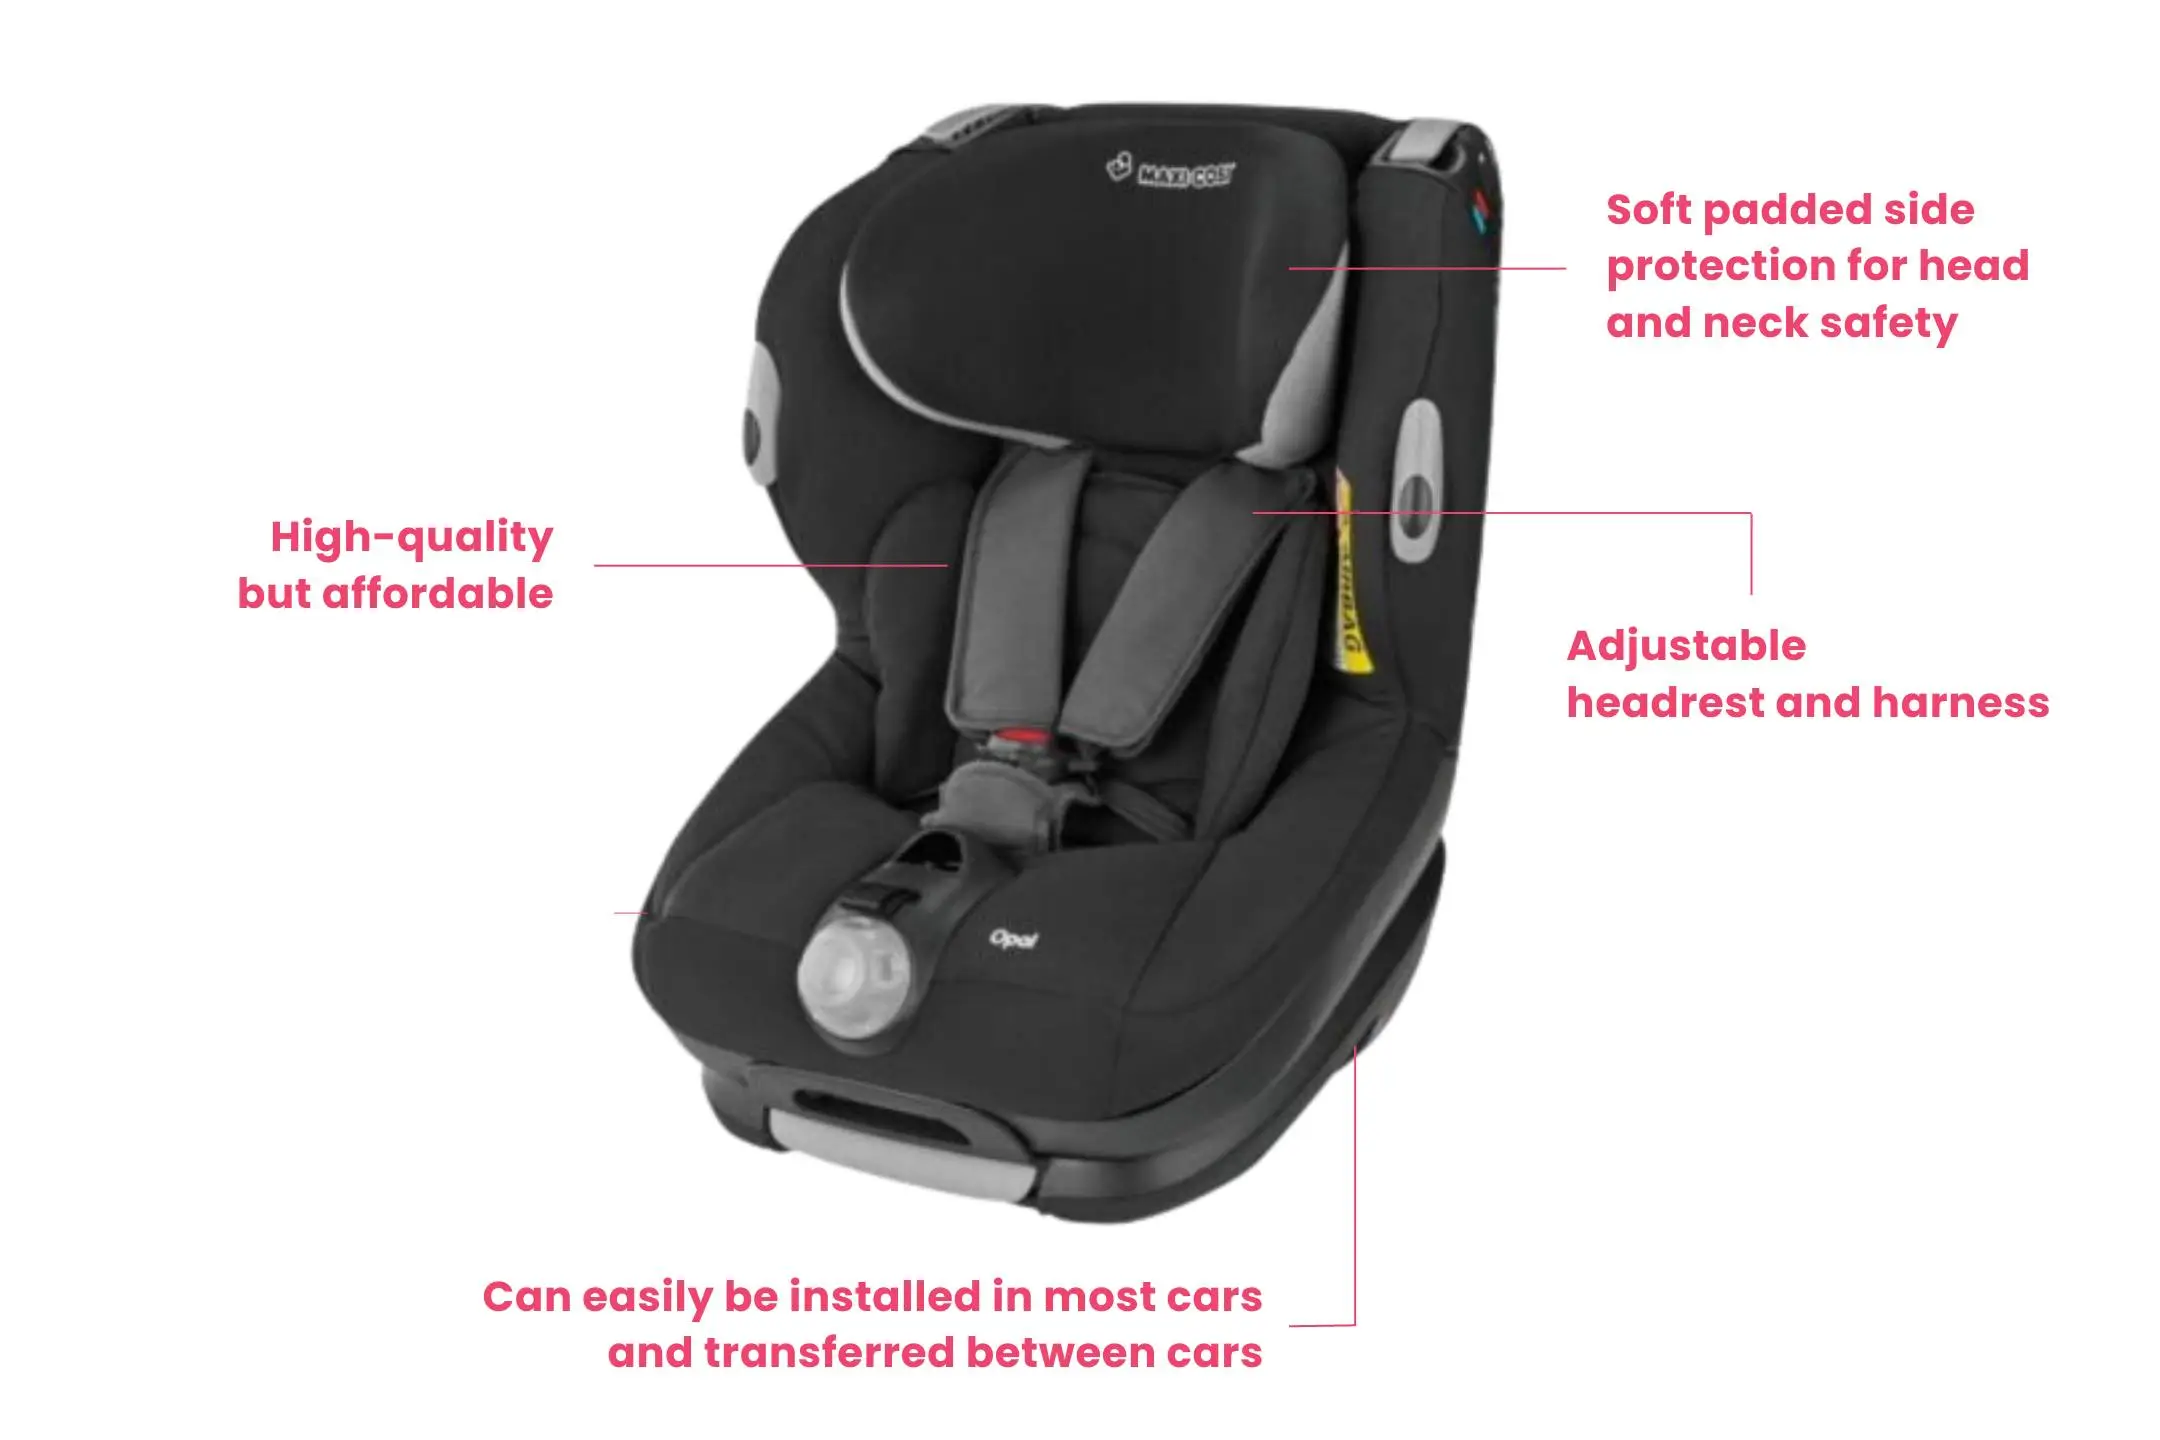 Maxi Cosi Opal Baby Car Seat features